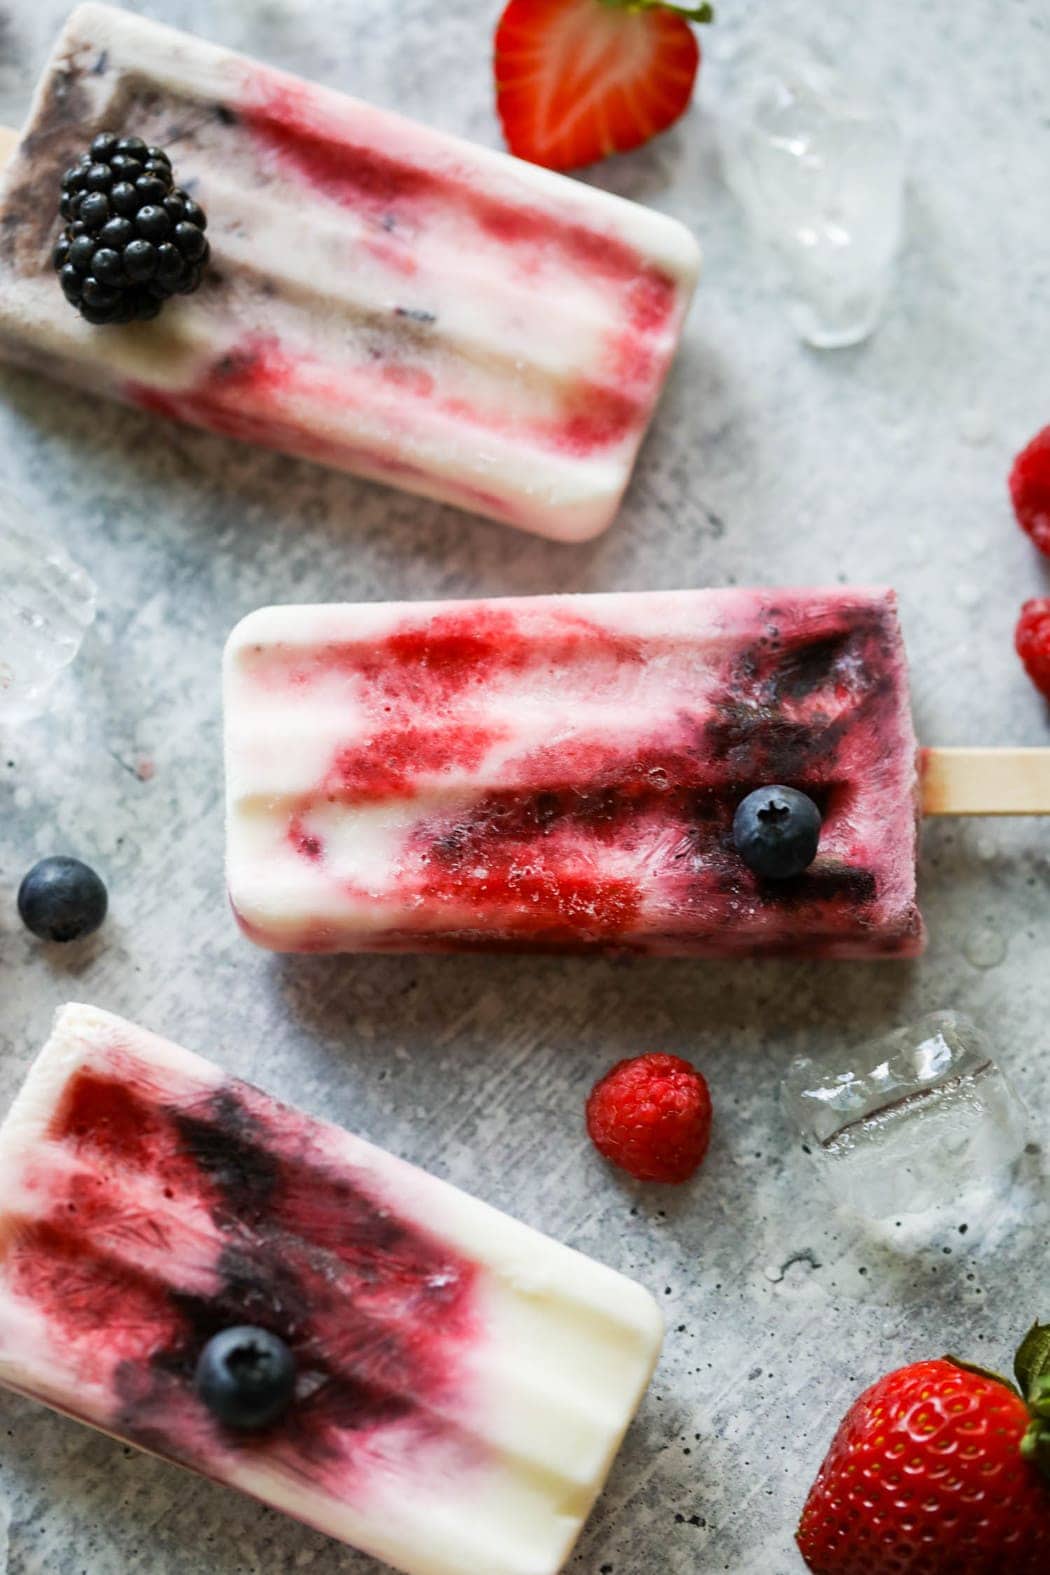 https://therealfooddietitians.com/wp-content/uploads/2021/06/Creamy-Berry-Ice-Pops-21-of-41.jpg